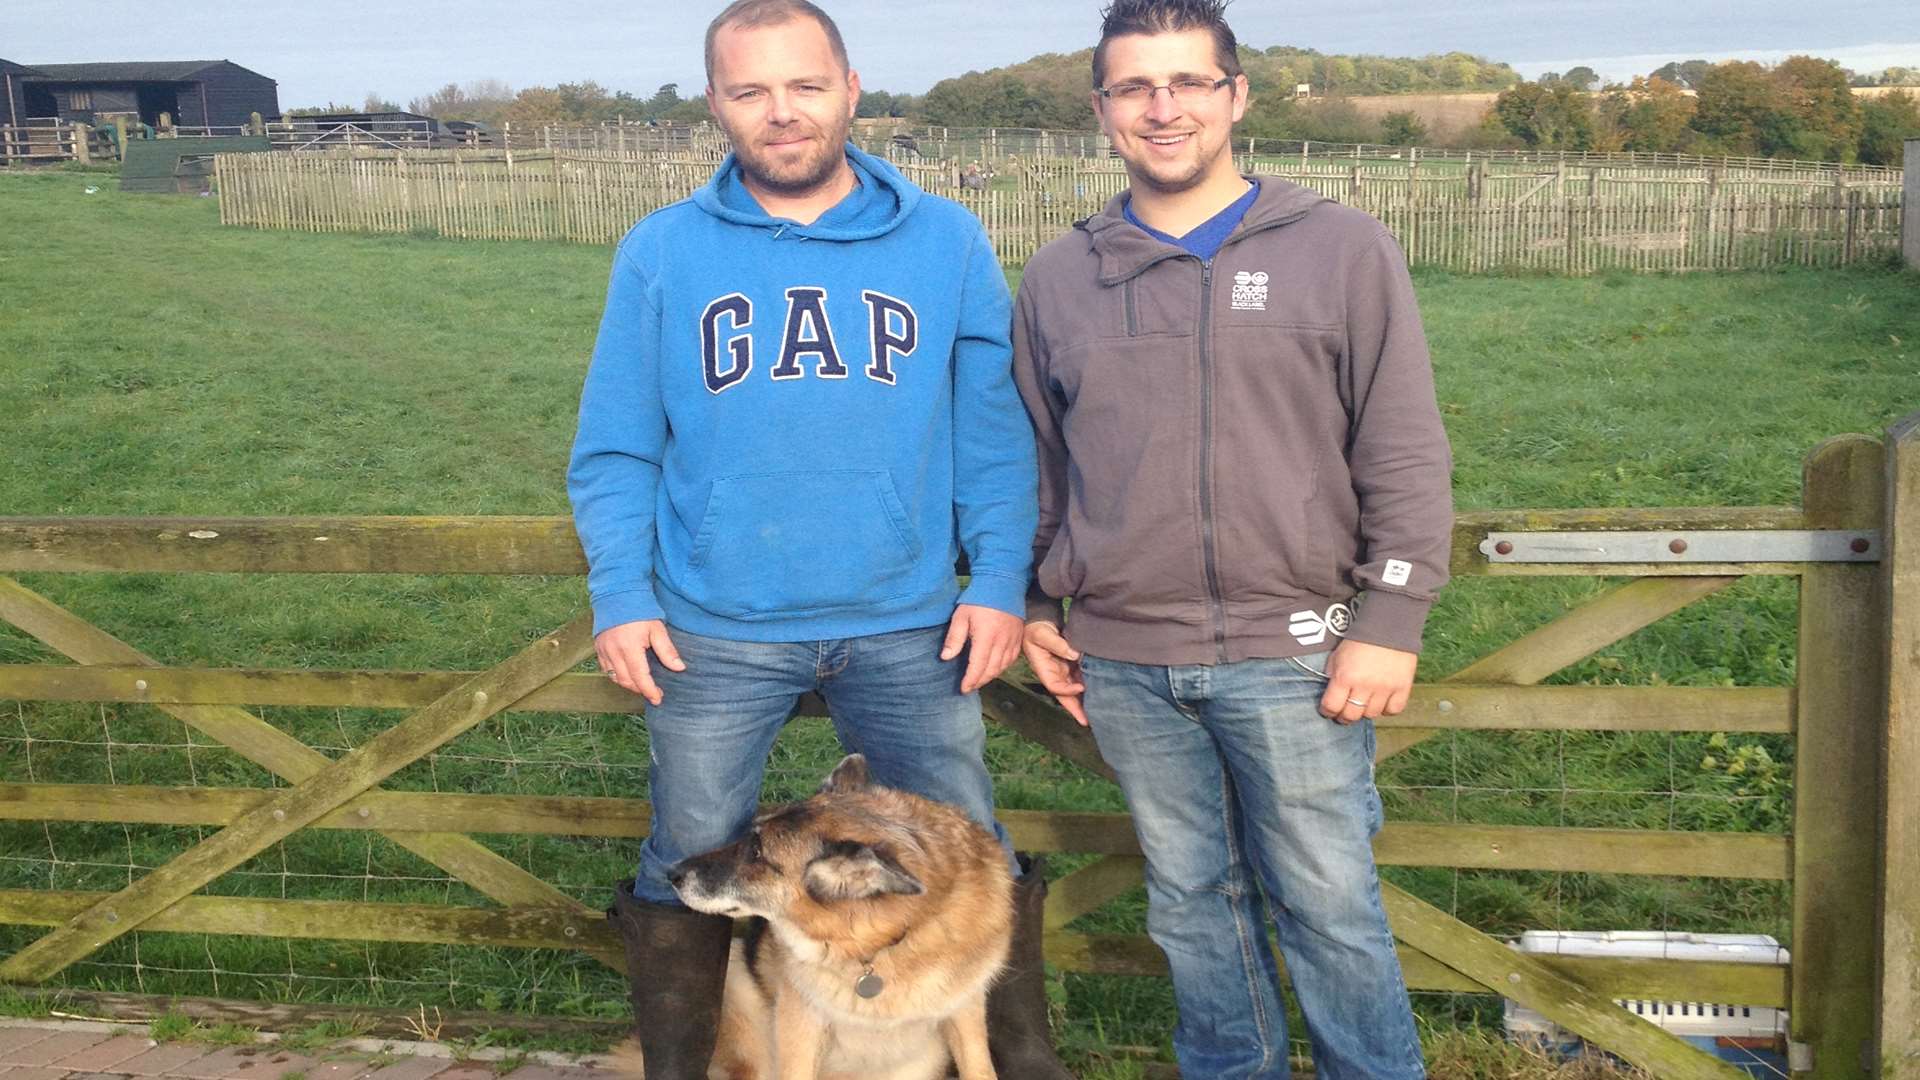 Terry Kemp and Chris Johns with dog Kym, age 15 who lives at the charity Happy Endings